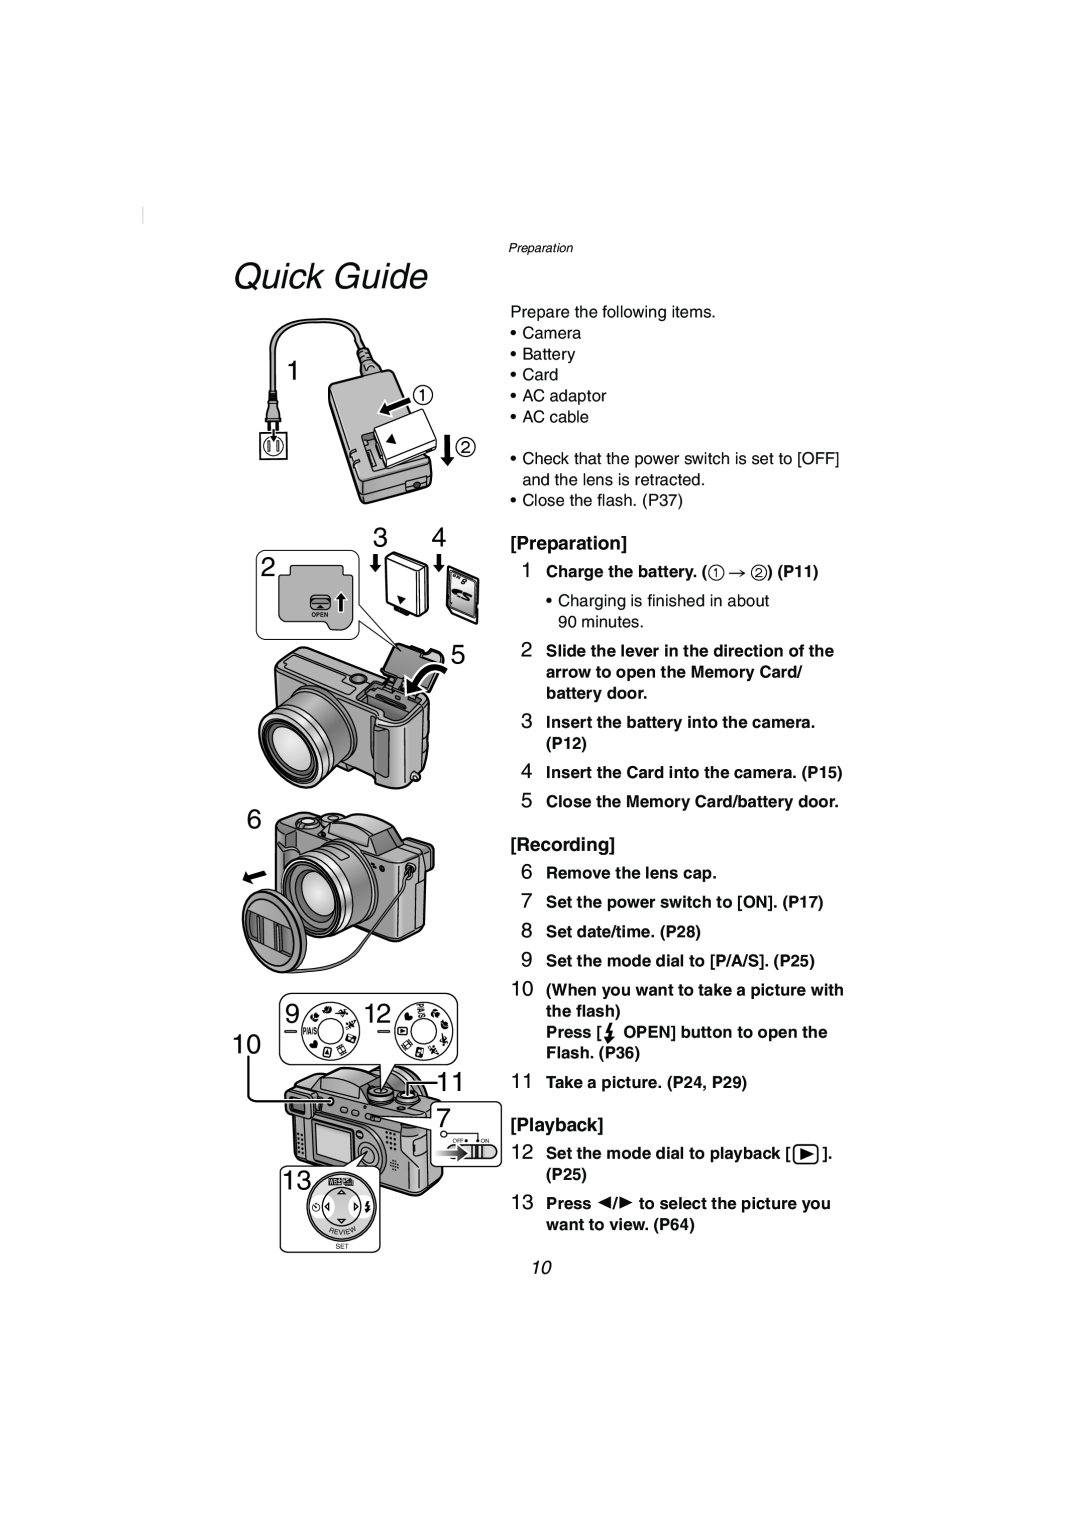 Panasonic DMC-FZ2PP Quick Guide, 9 12, Charge the battery. 1 # 2 P11, Insert the battery into the camera. P12 